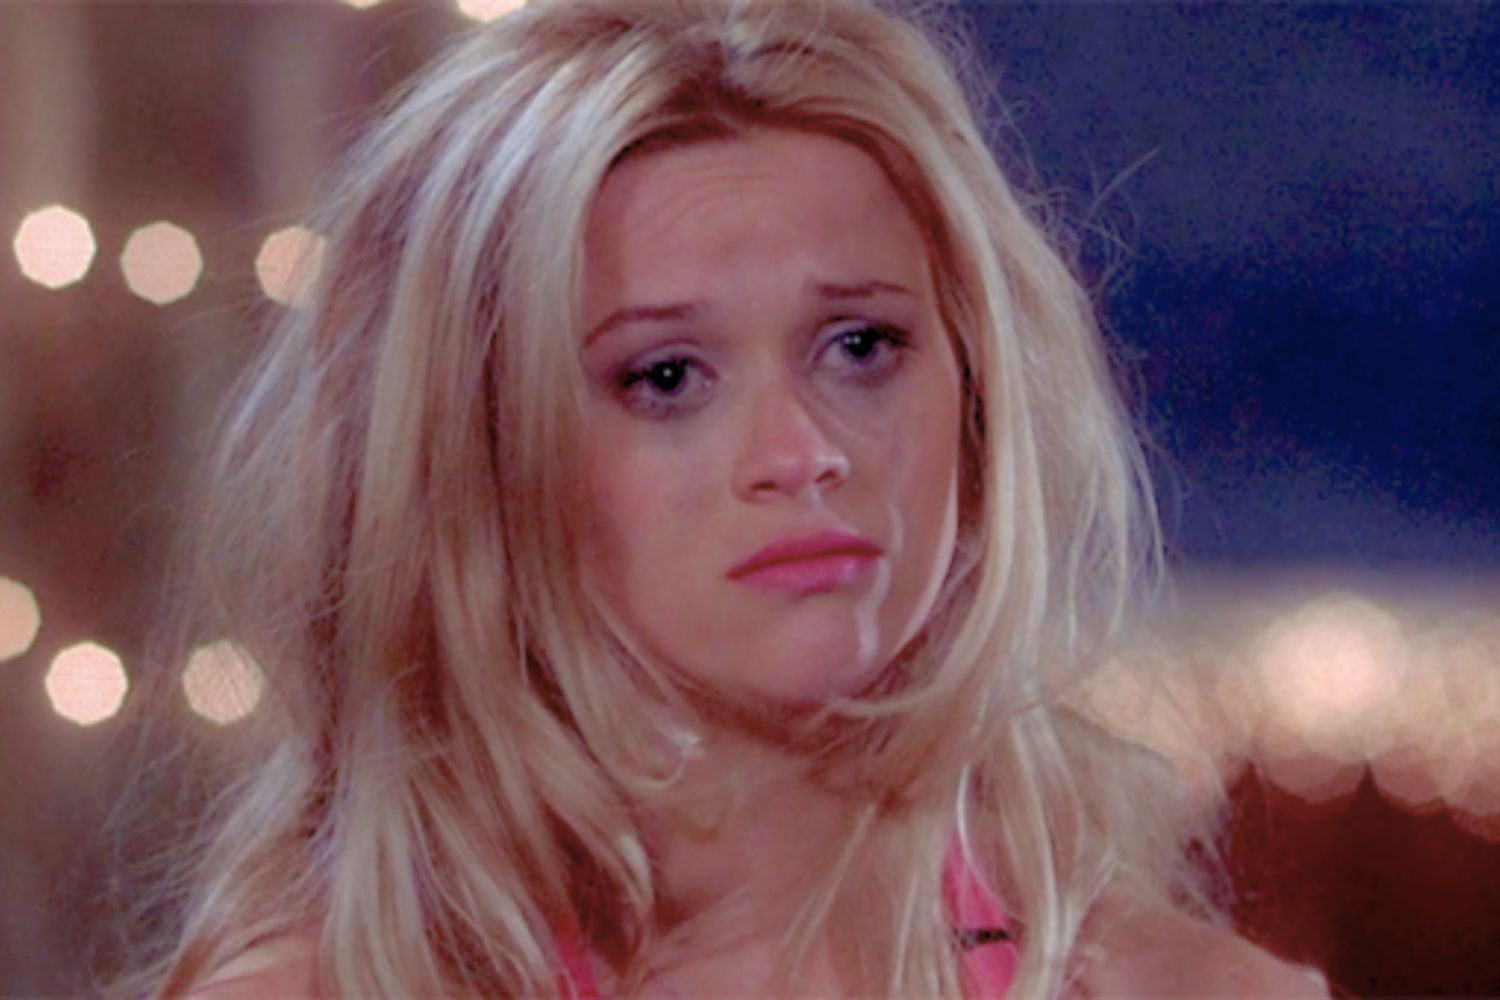 reese-witherspoon-as-elle-woods-in-legally-blonde-sad